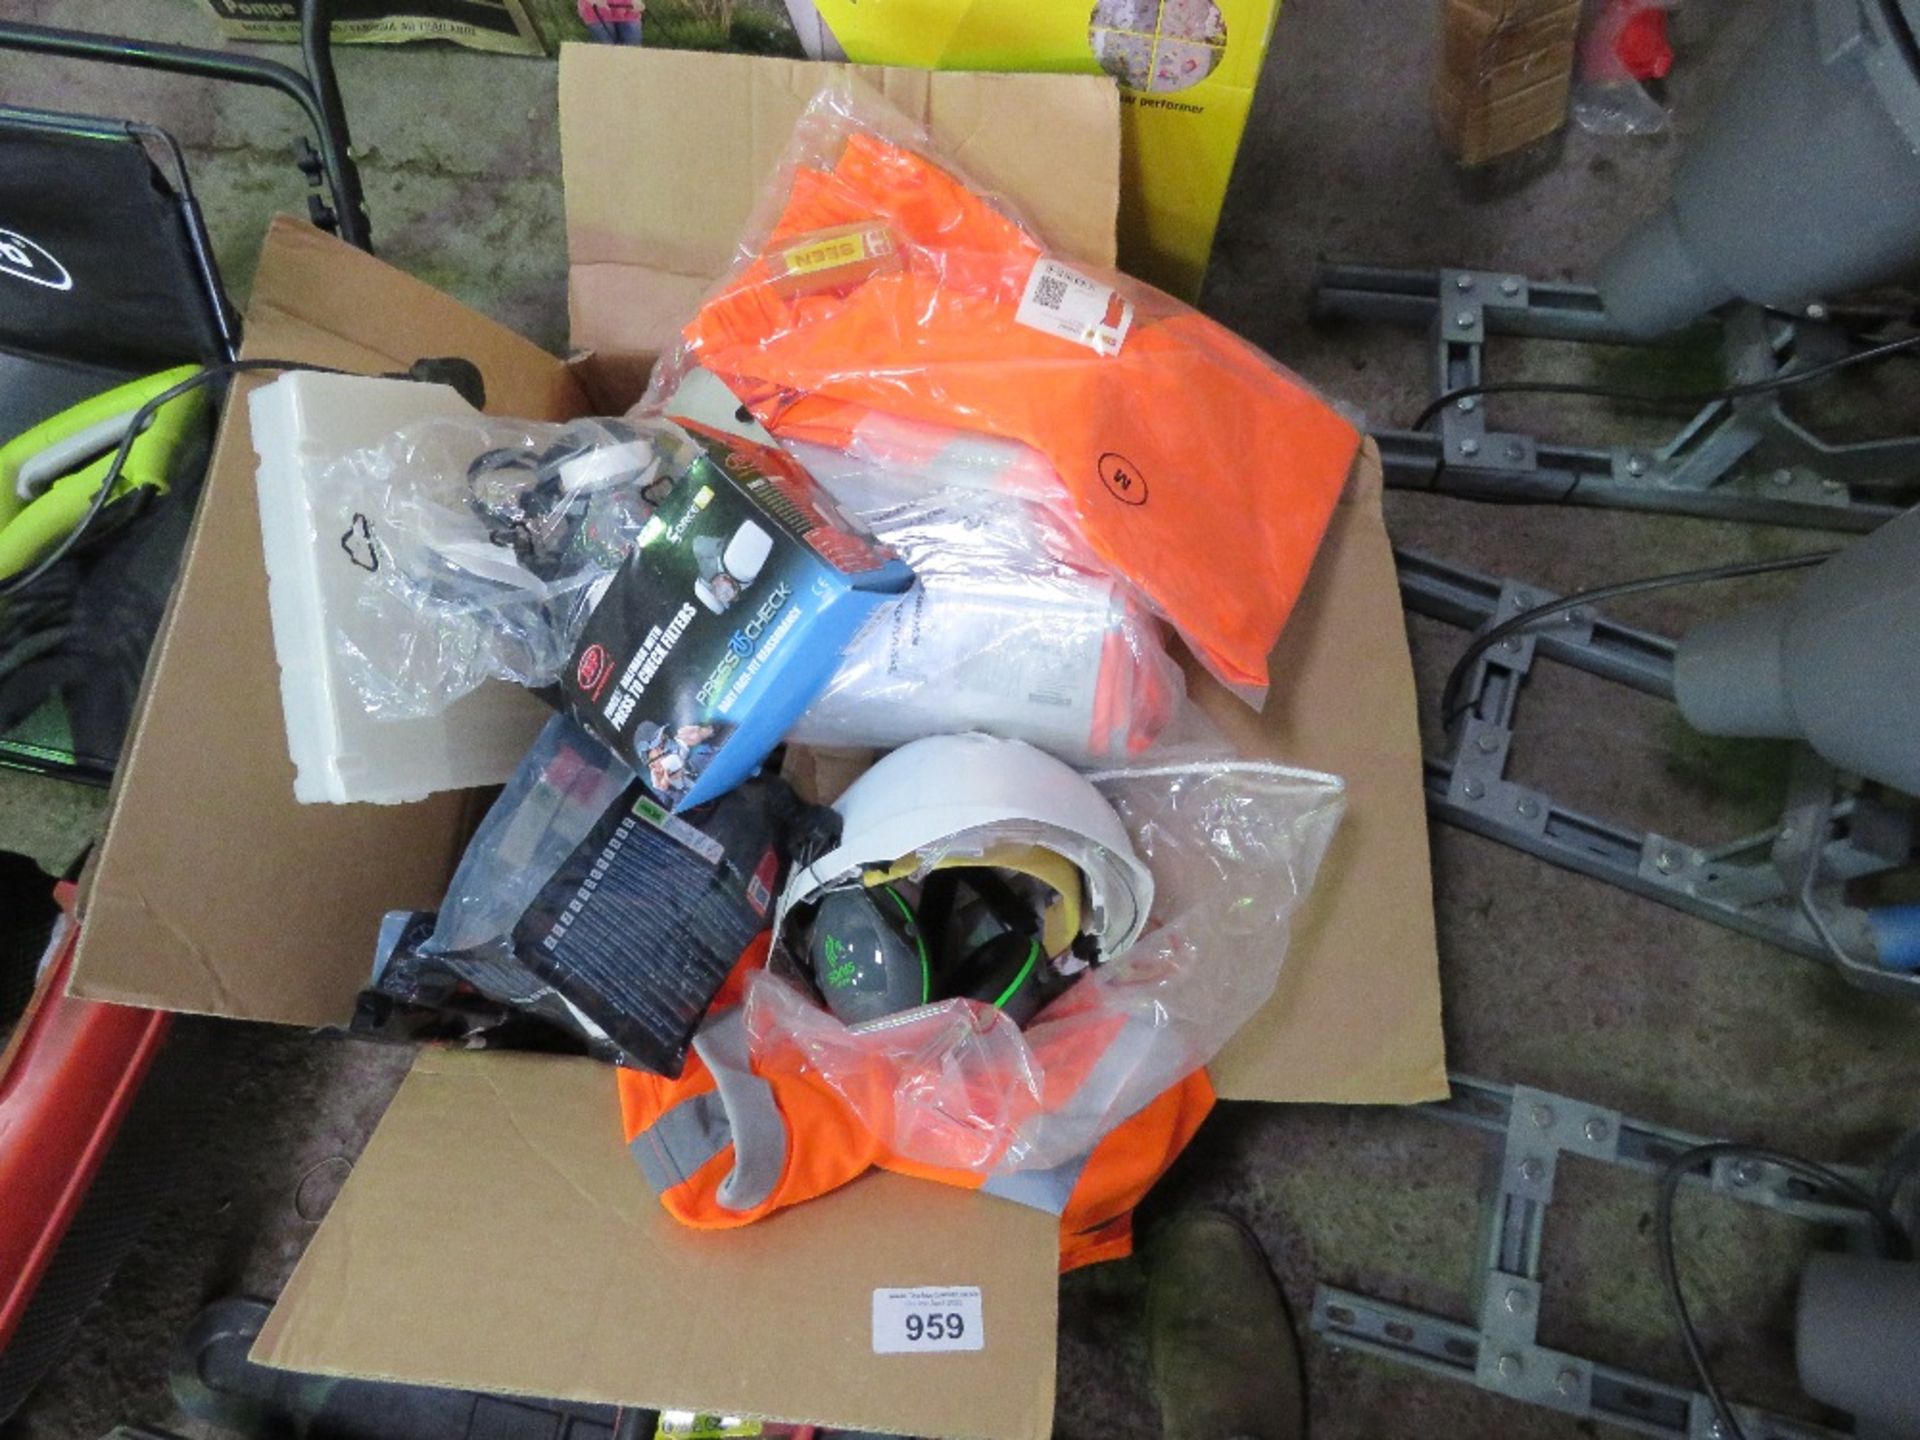 BOX OF ASSORTED SAFETY CLOTHING INCLUDING MASKS, HELMETS, EARMUFFS FOR HELMETS, TROUSERS, SHIRTS ETC